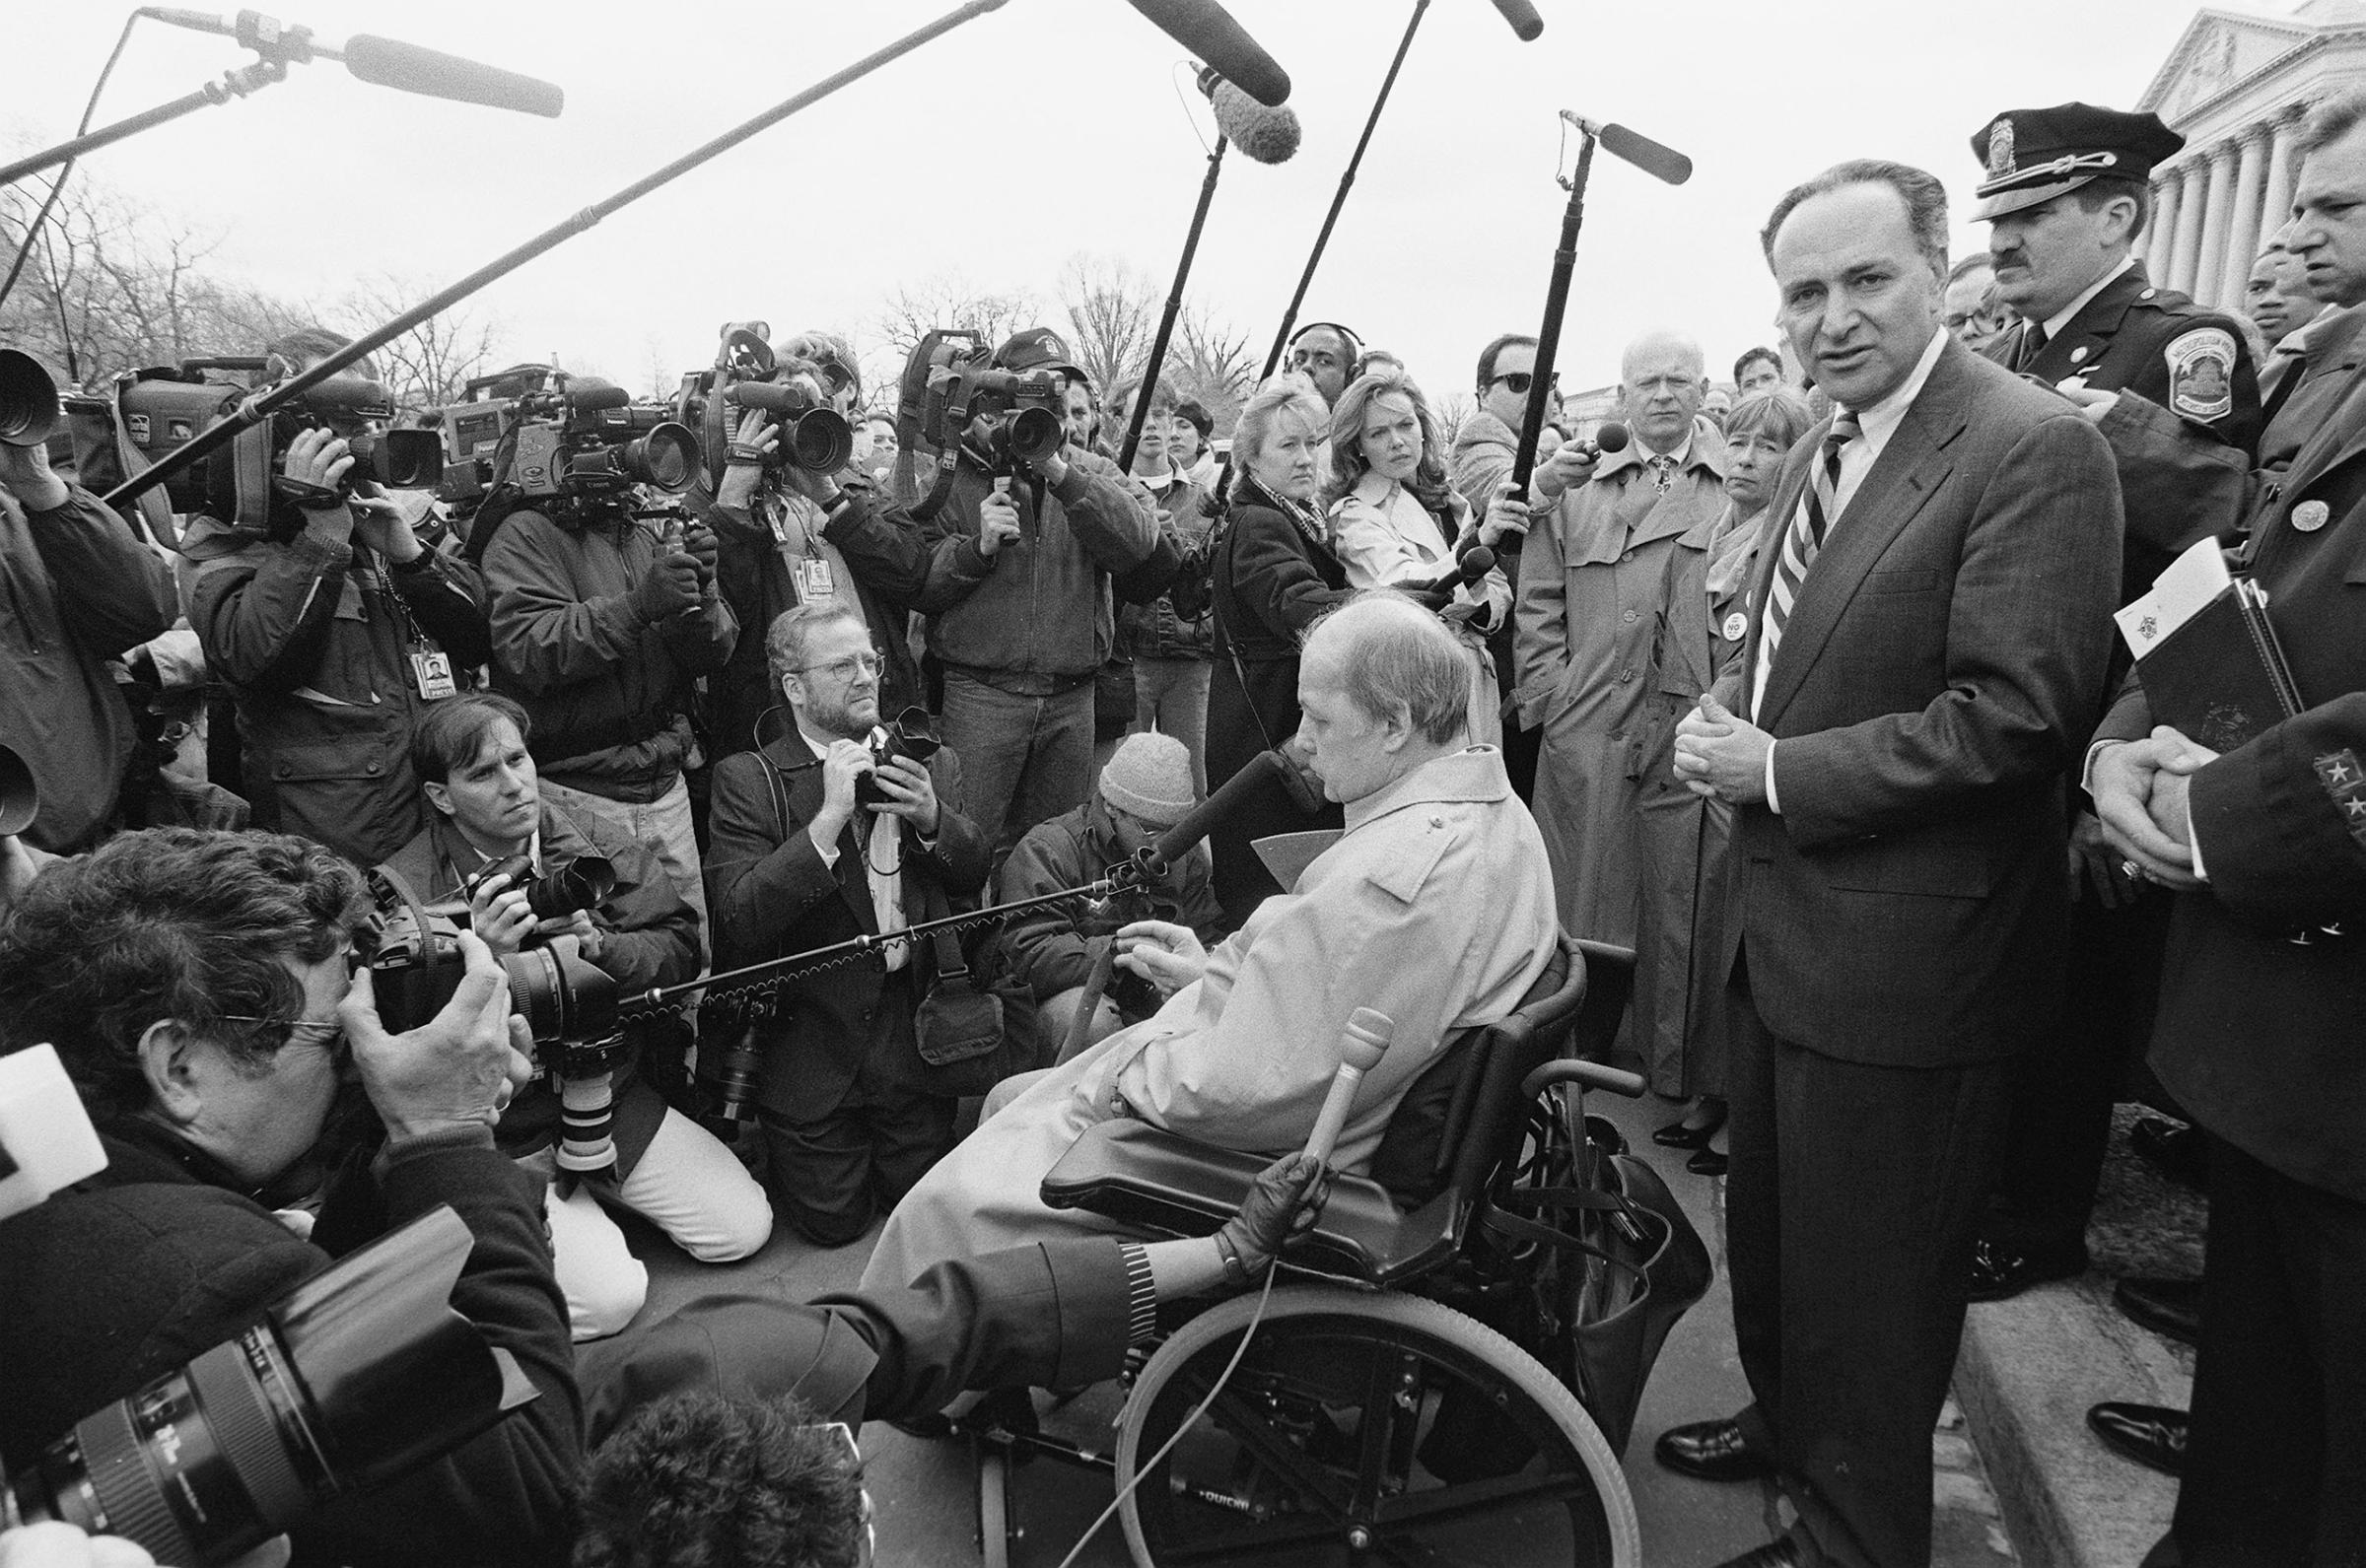 Schumer, stands behind Jim Brady, who was shot in the head during John Hinckley's assassination attempt on President Ronald Reagan, during a news conference outside the the U.S. Capitol supporting the assault weapons ban, March, 22, 1996.